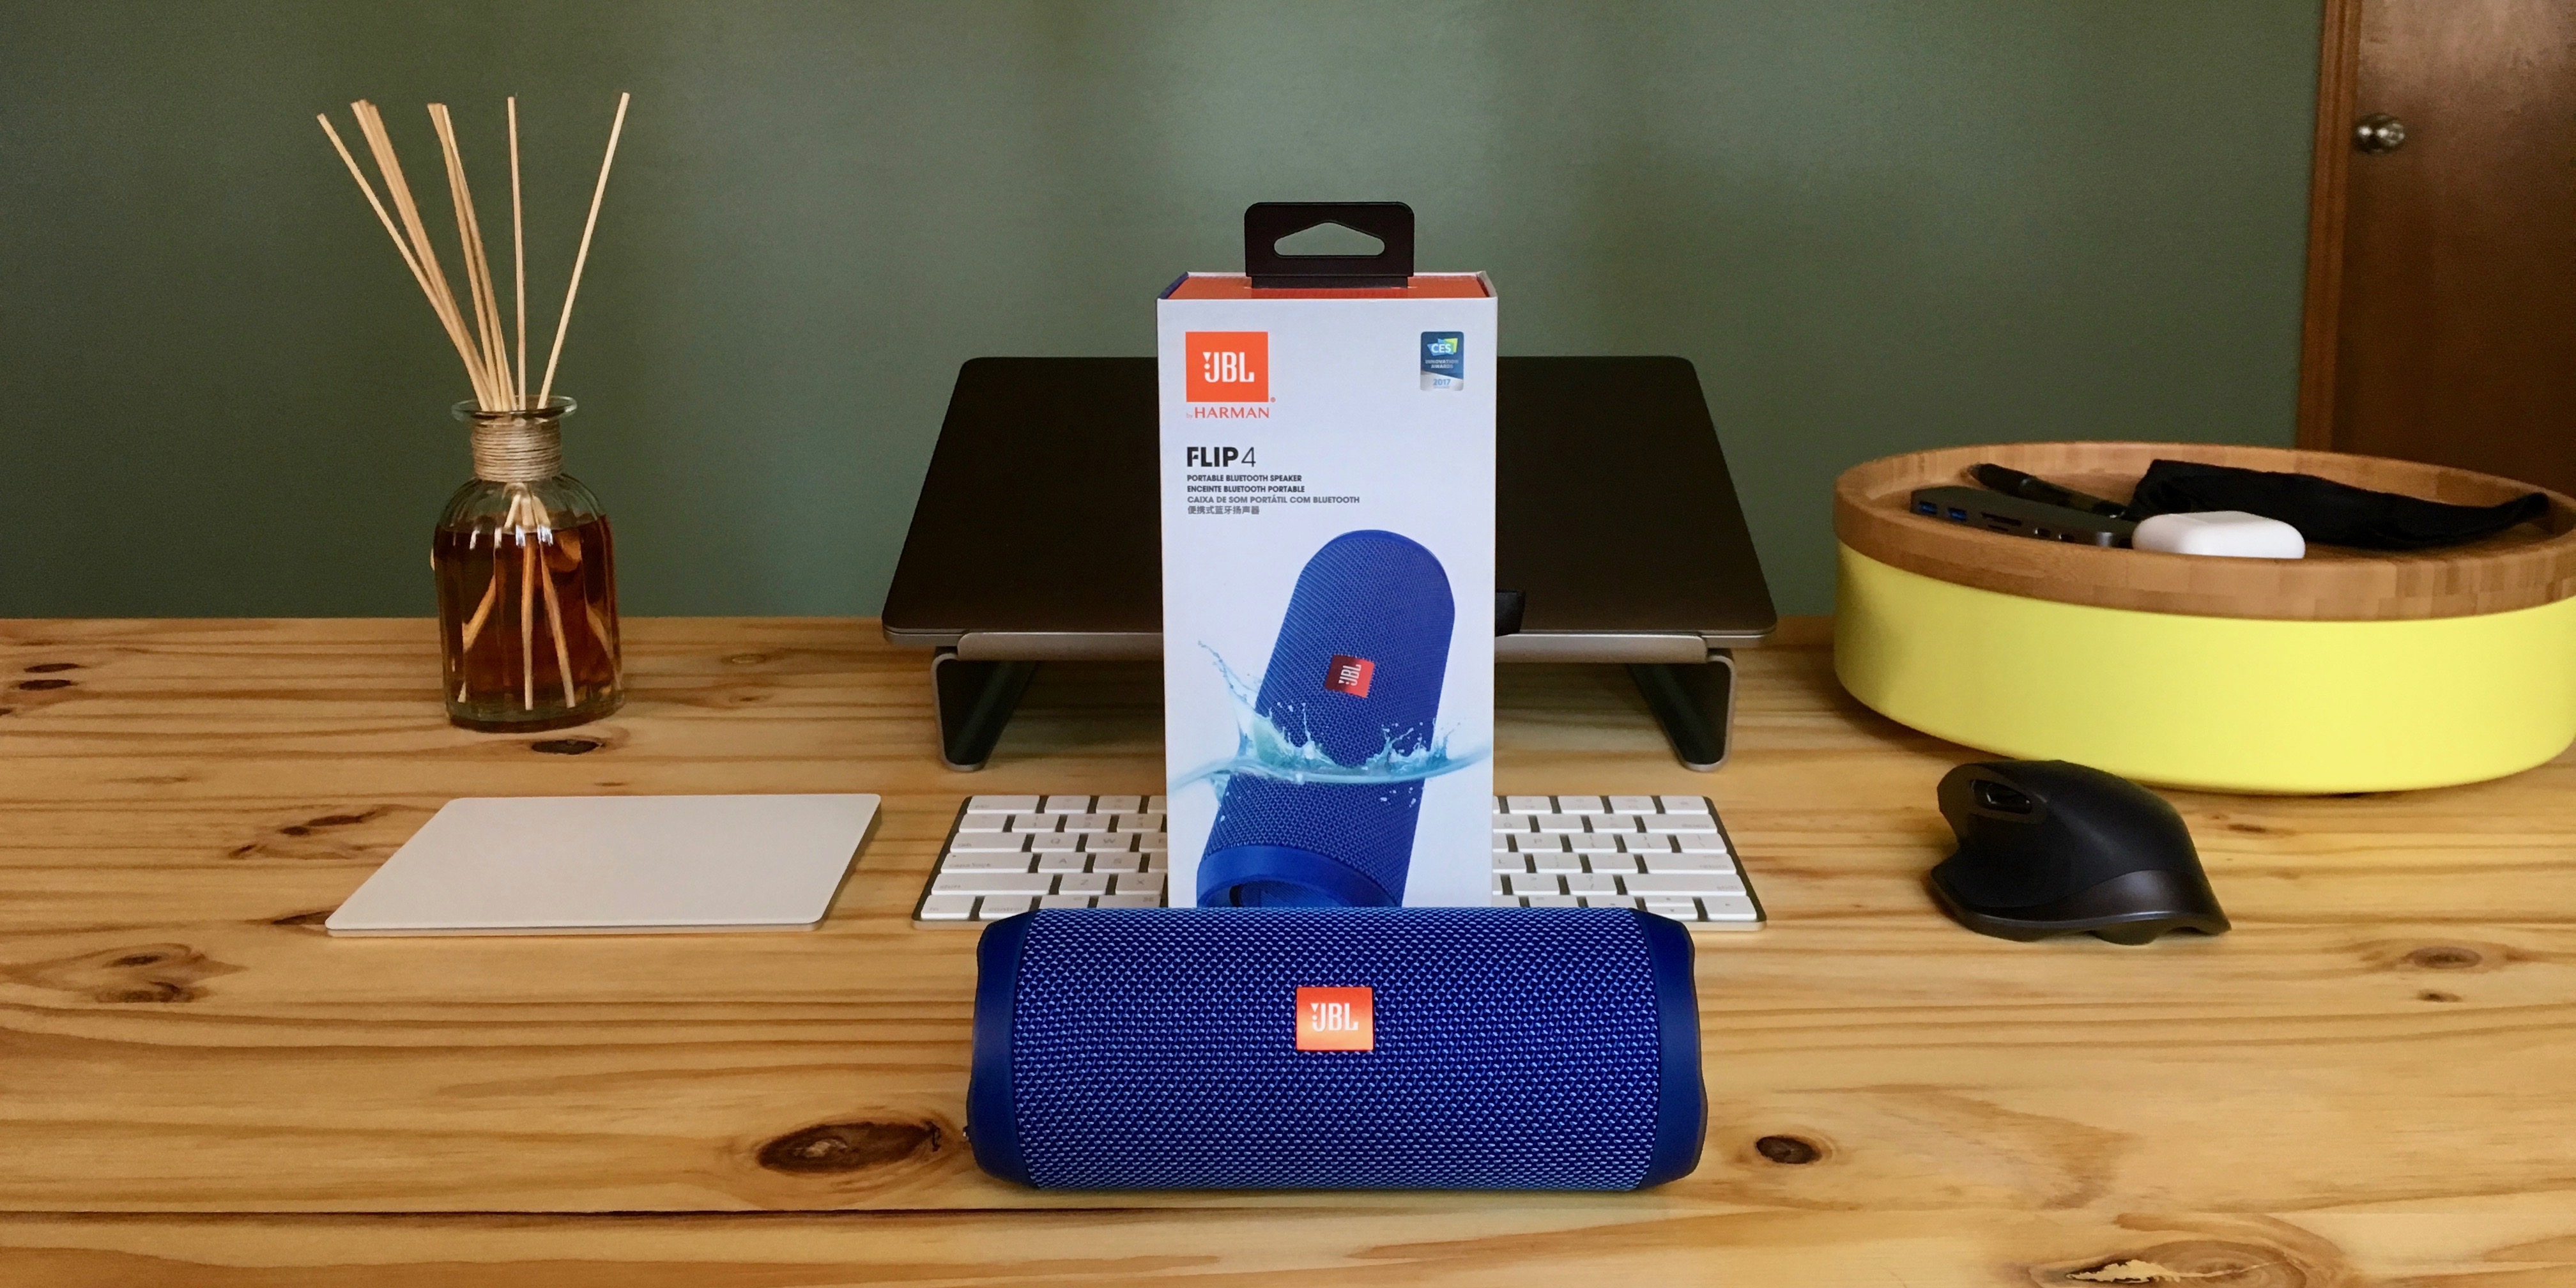 Overgang Sædvanlig Stor vrangforestilling Review: JBL's Flip 4 waterproof speaker offers great sound and features at  a fair price